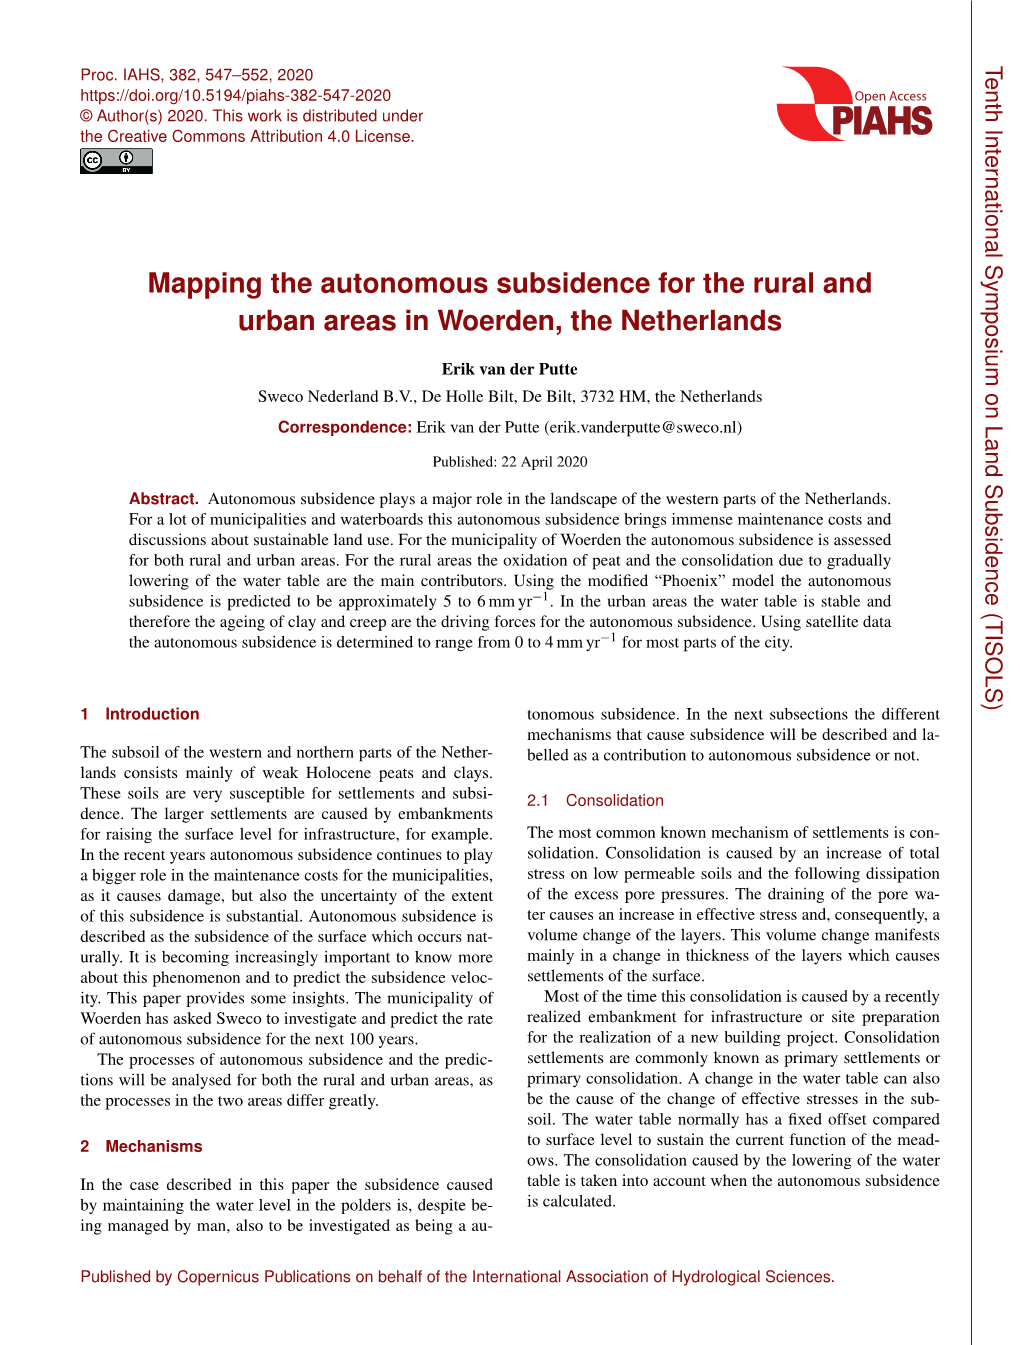 Mapping the Autonomous Subsidence for the Rural and Urban Areas in Woerden, the Netherlands